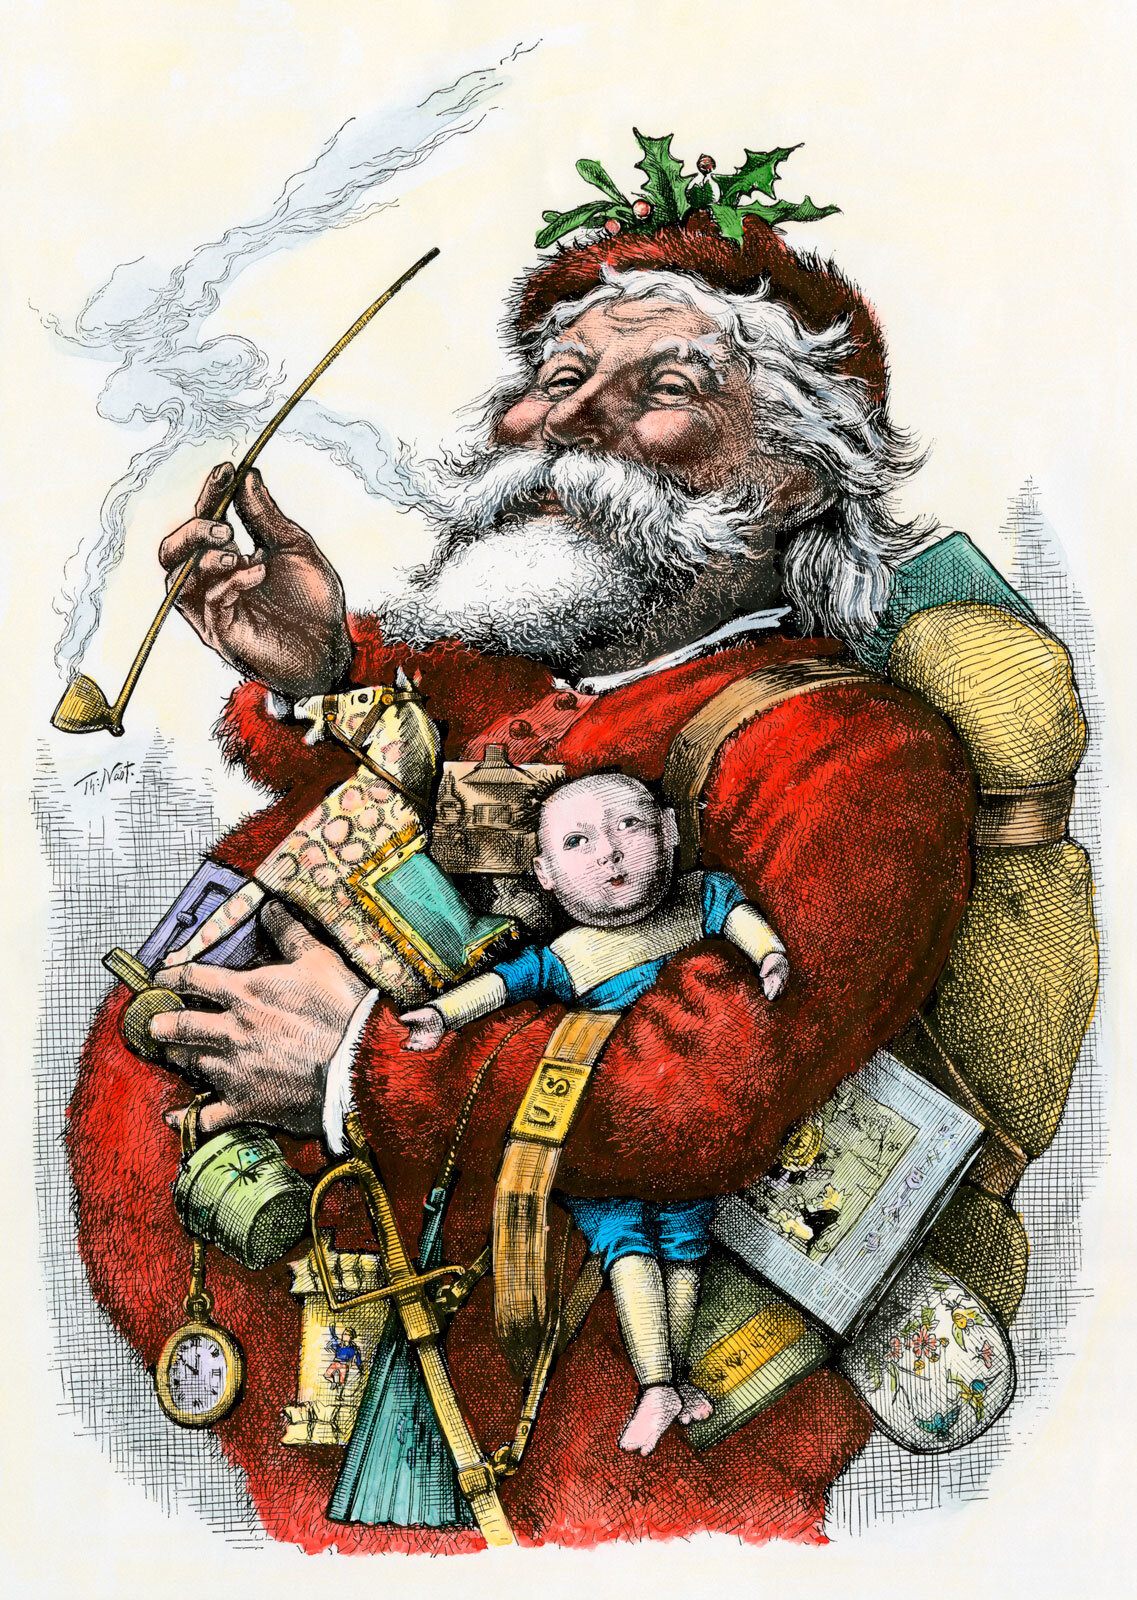  A colored version of the famous illustration of “Merry Old Santa Claus” by Thomas Nast, which appeared in the January 1, 1881 edition of  Harper’s Weekly  